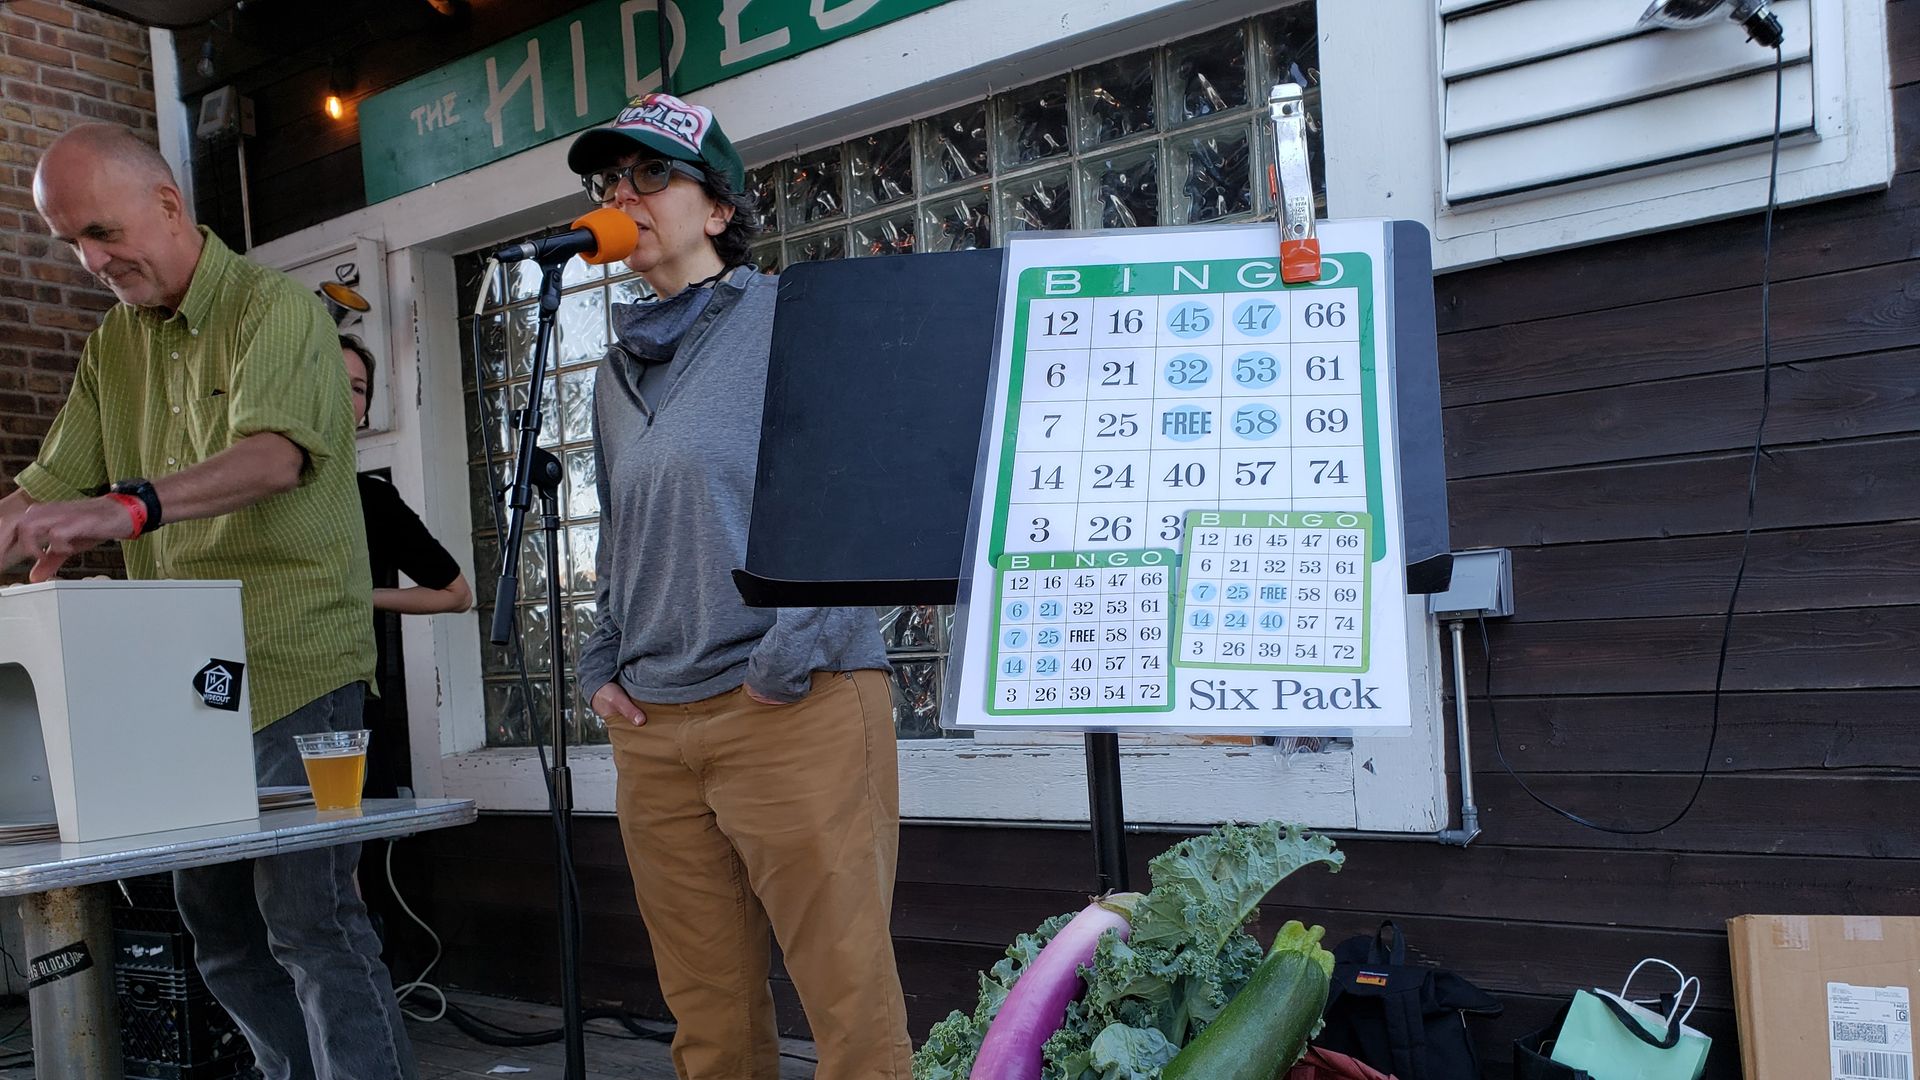 Person standing behind a microphone, next to a large BINGO card, and a basket of vegetables on table in front.